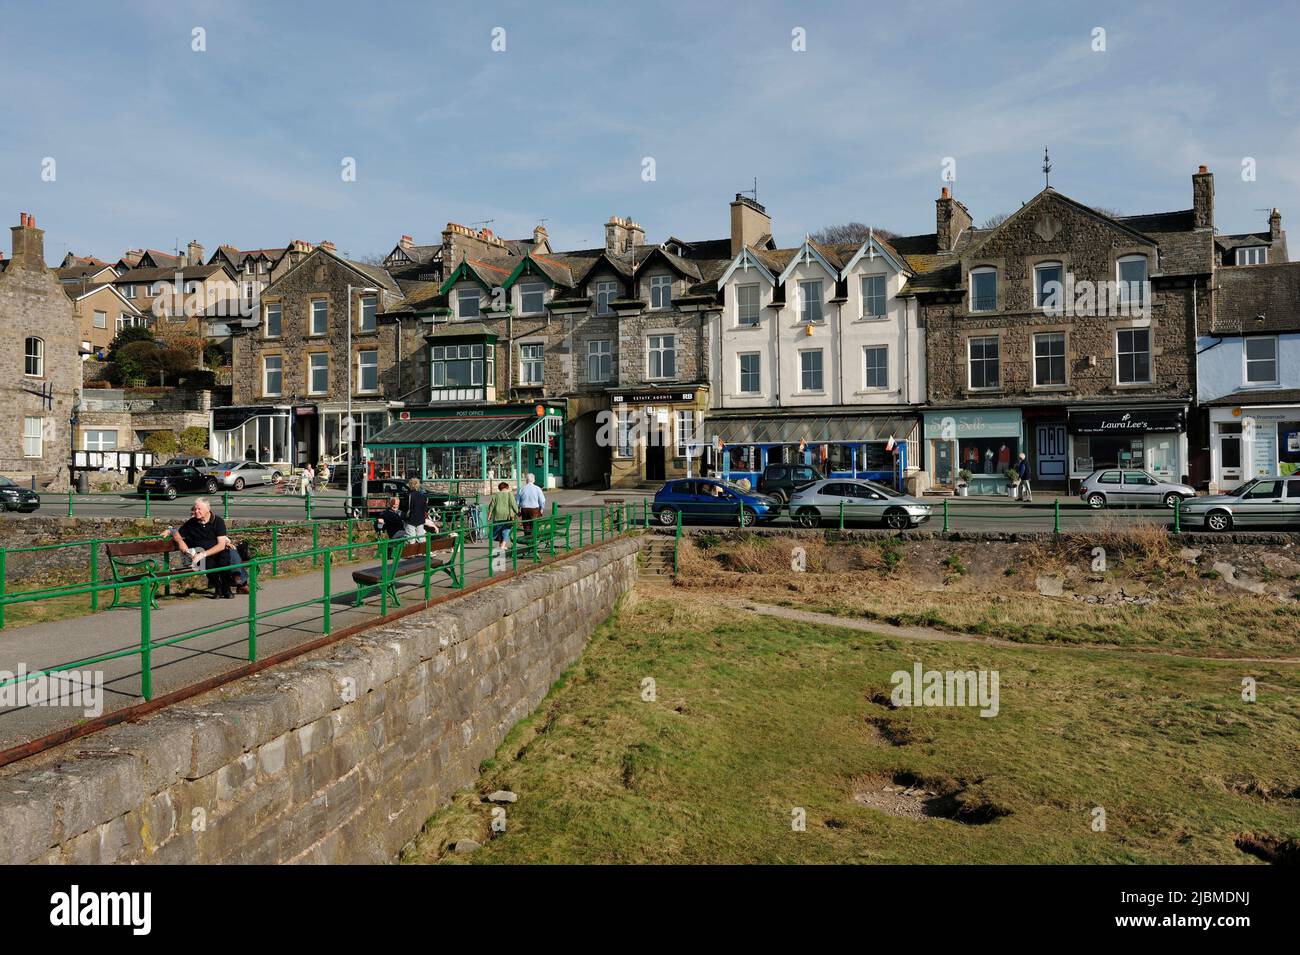 Shops and businesses on The Promenade of Arnside village Cumbria UK Stock Photo